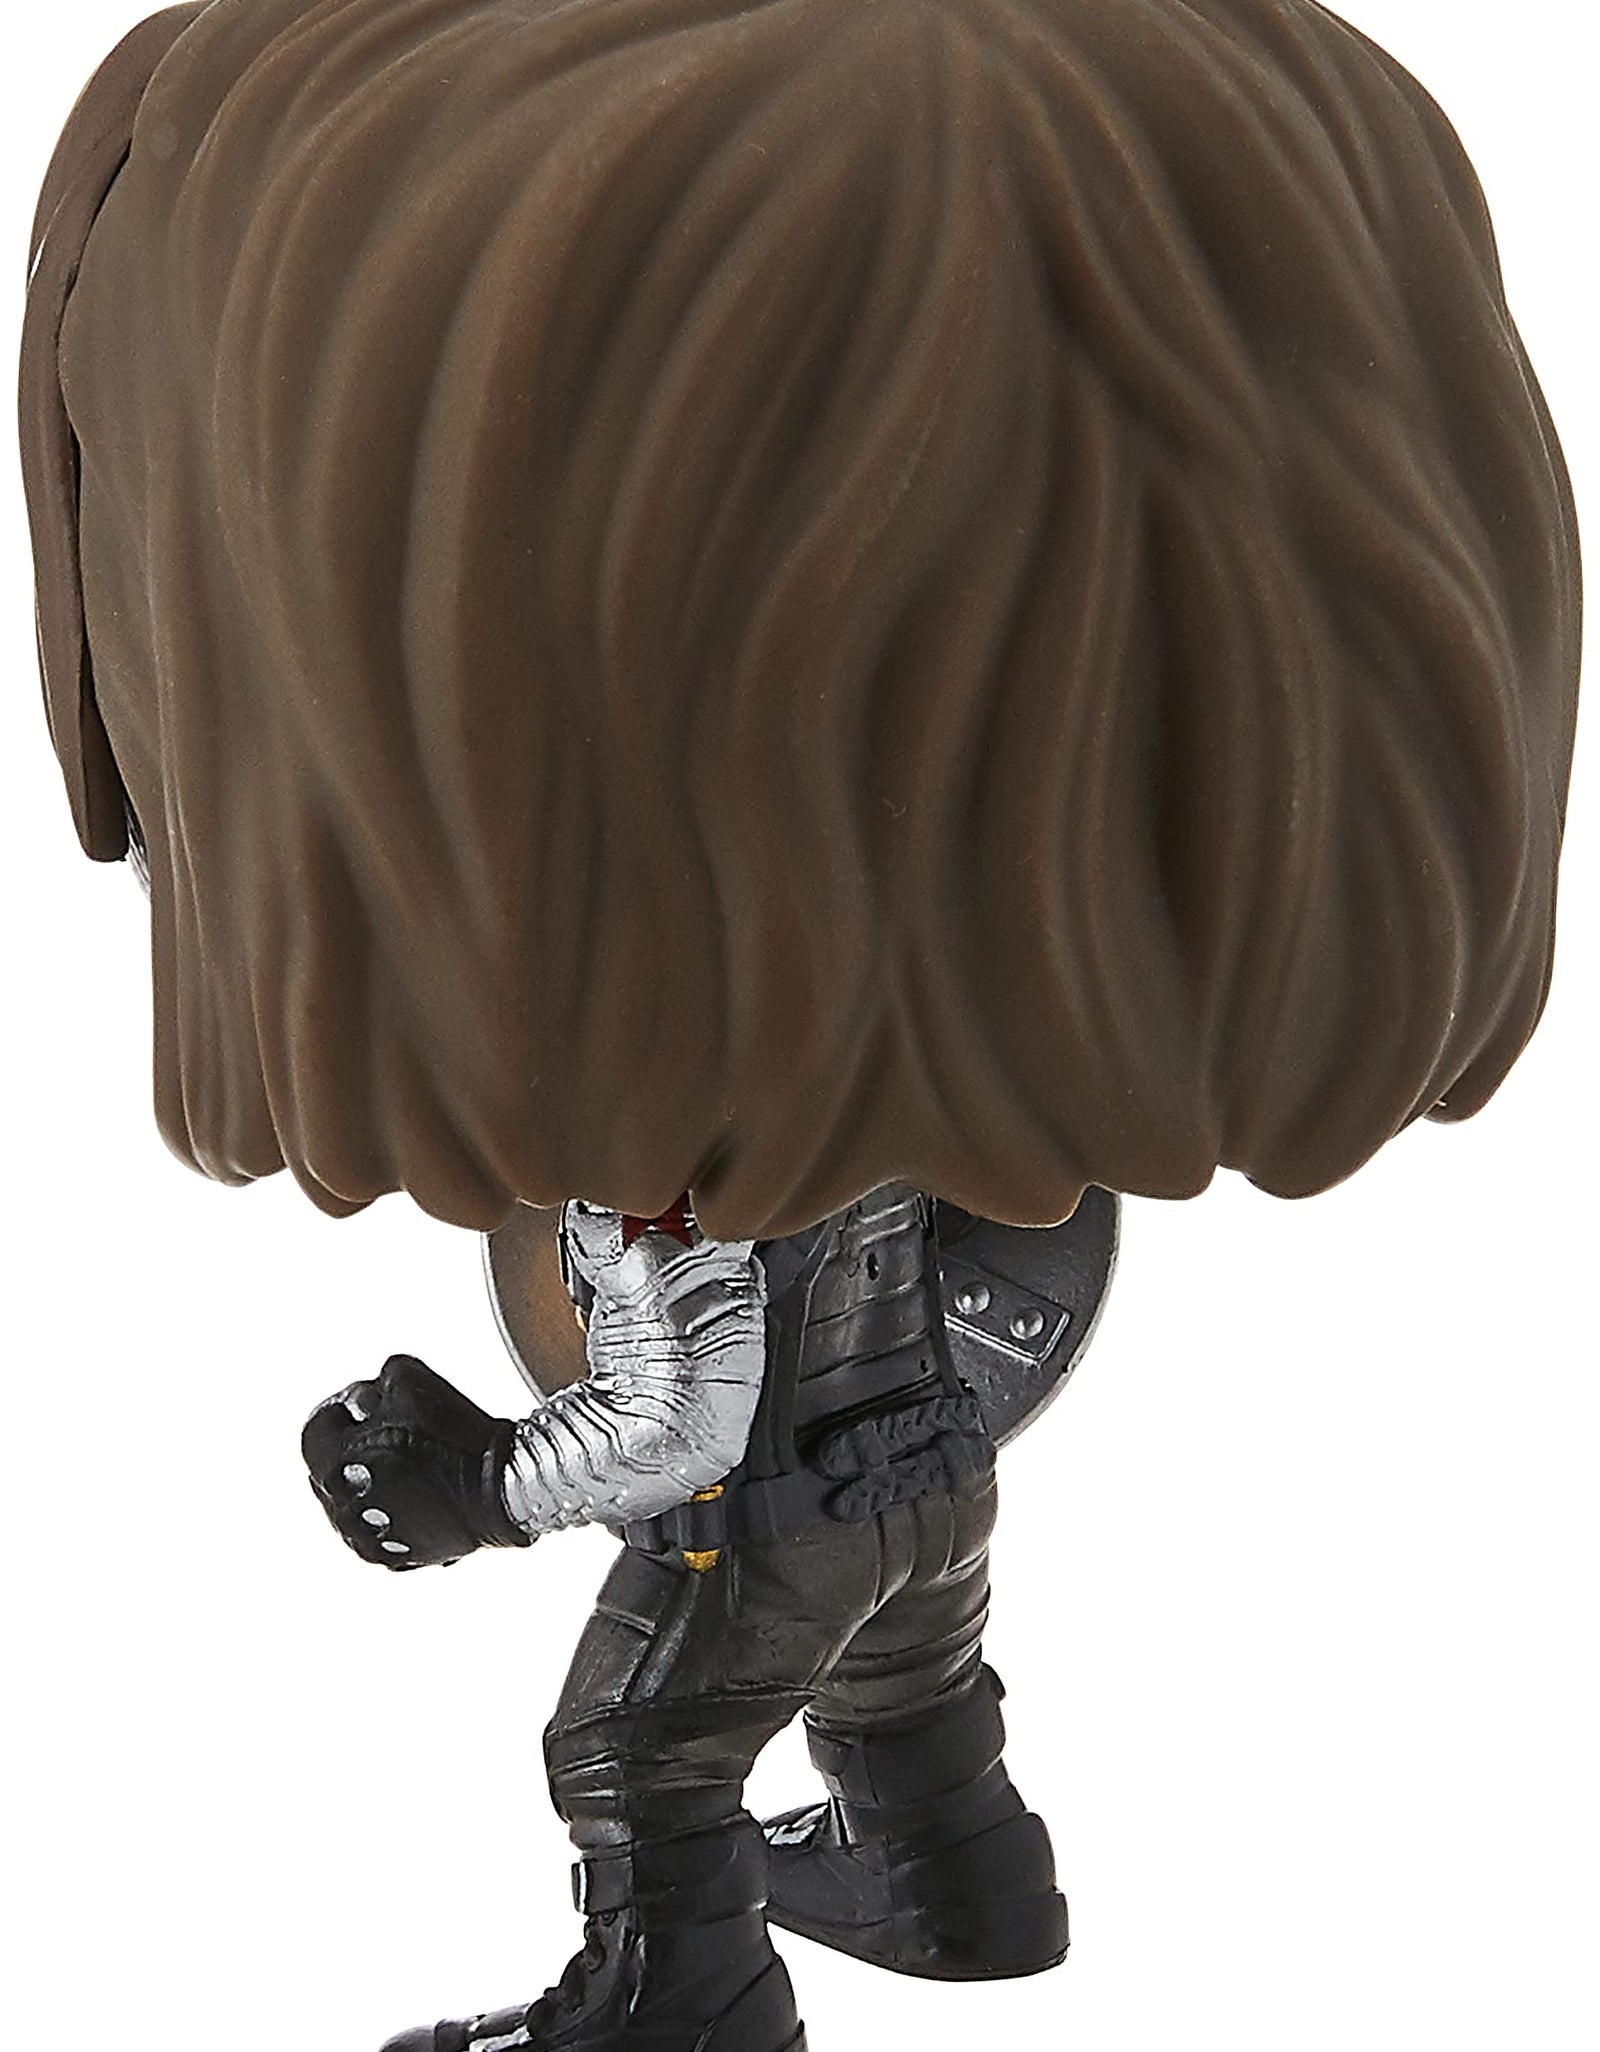 POP Marvel: Year of The Shield - The Winter Soldier